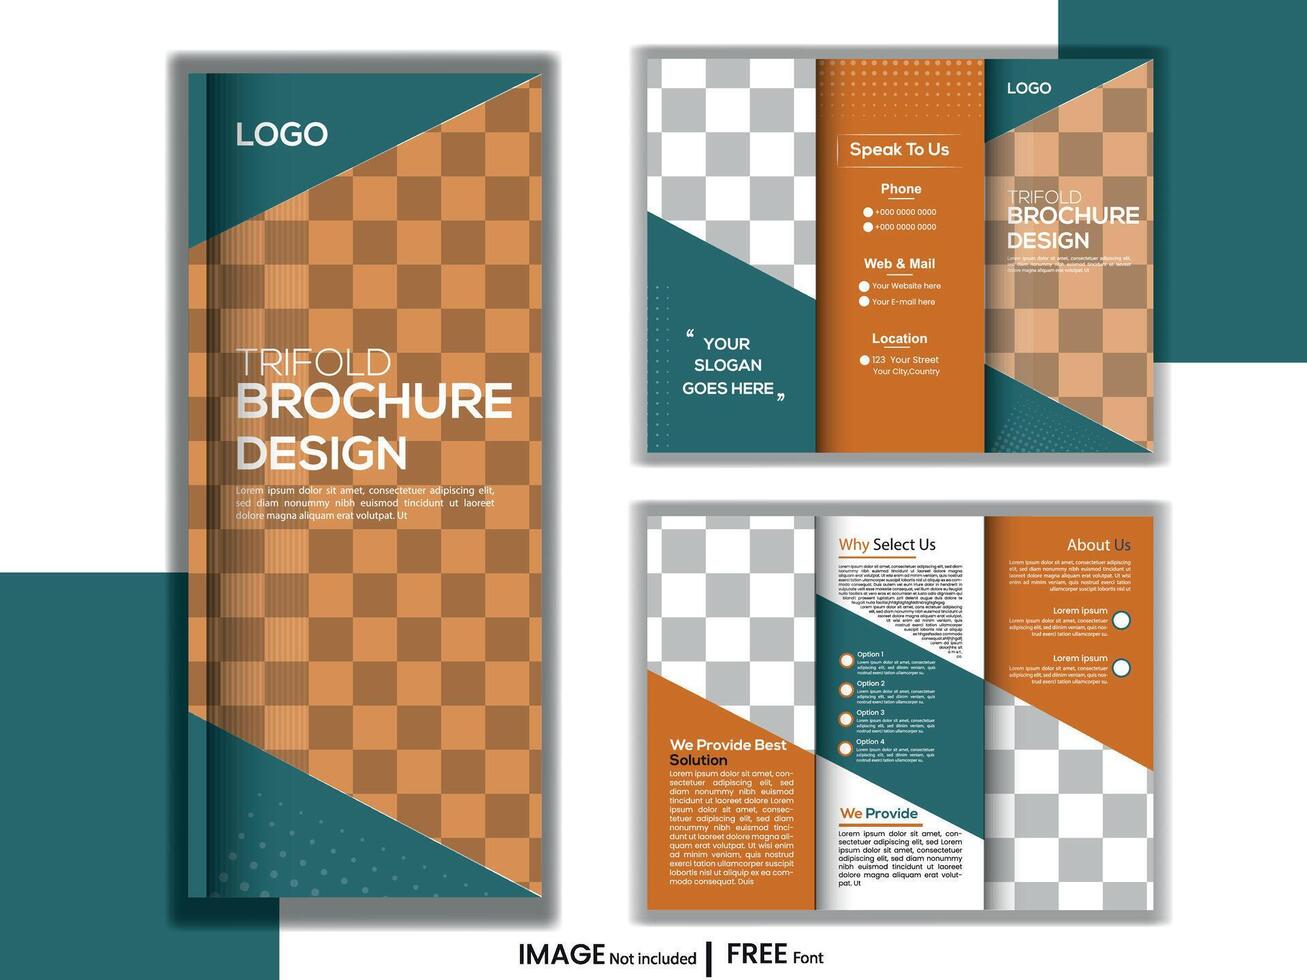 Trifold brochure design. Creative circle design marketing flyer template with image. vector